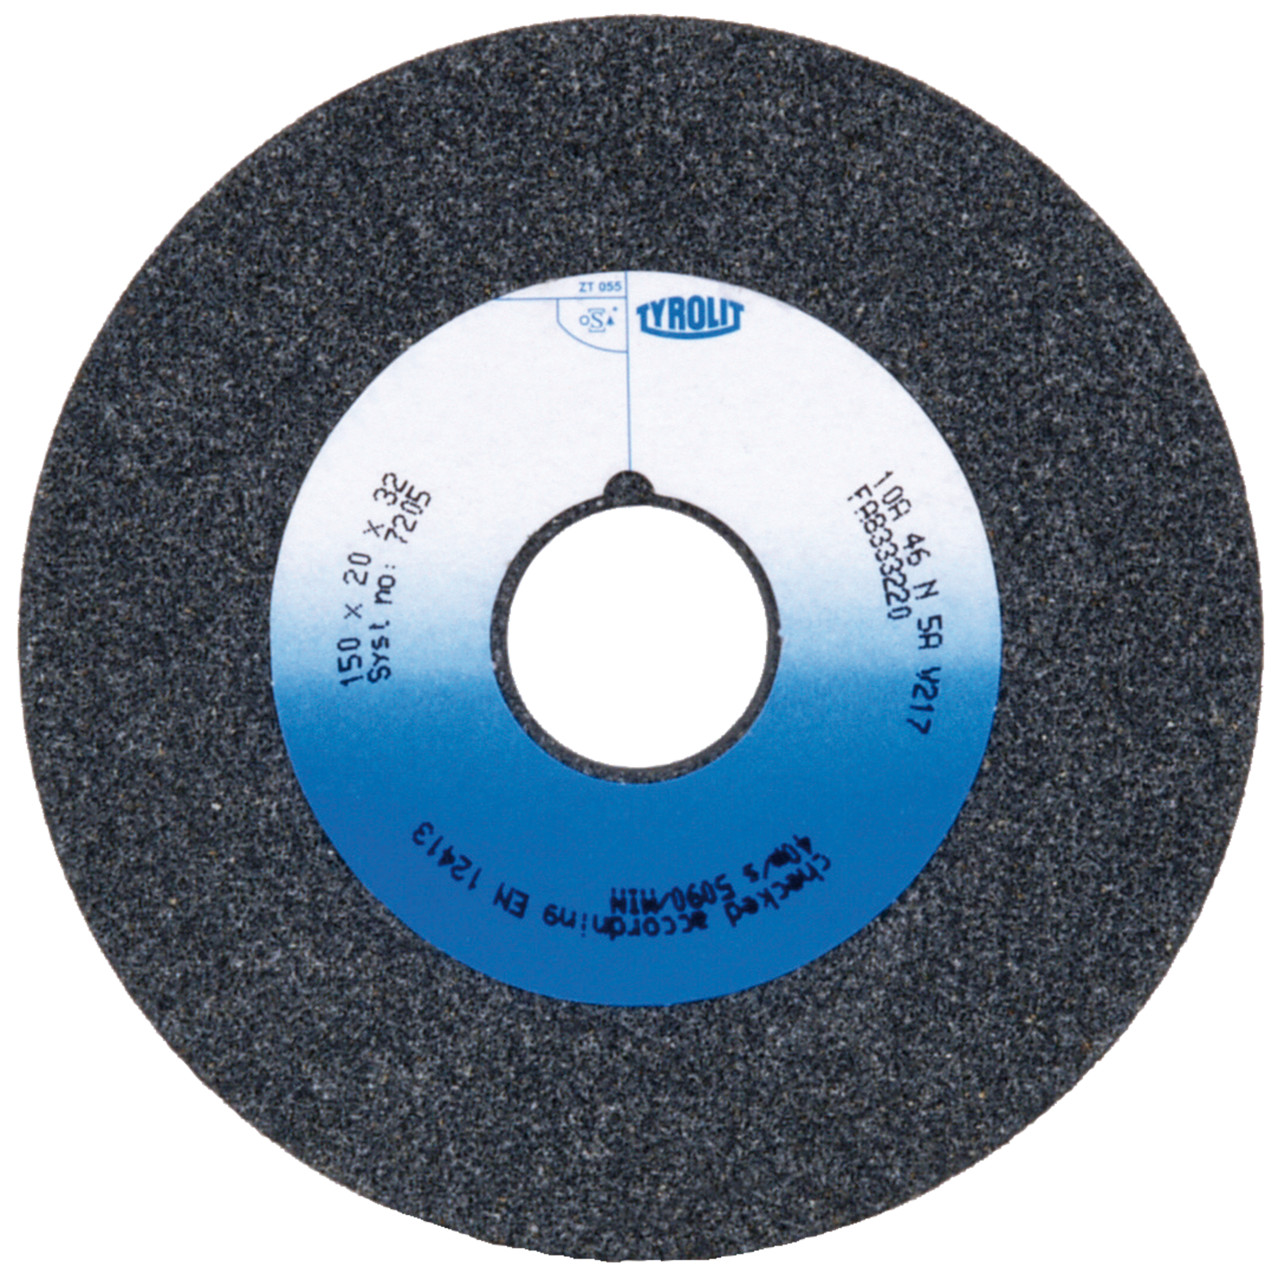 Tyrolit Conventional ceramic grinding discs DxDxH 200x25x32 For unalloyed and low-alloy steels, shape: 1, Art. 3217